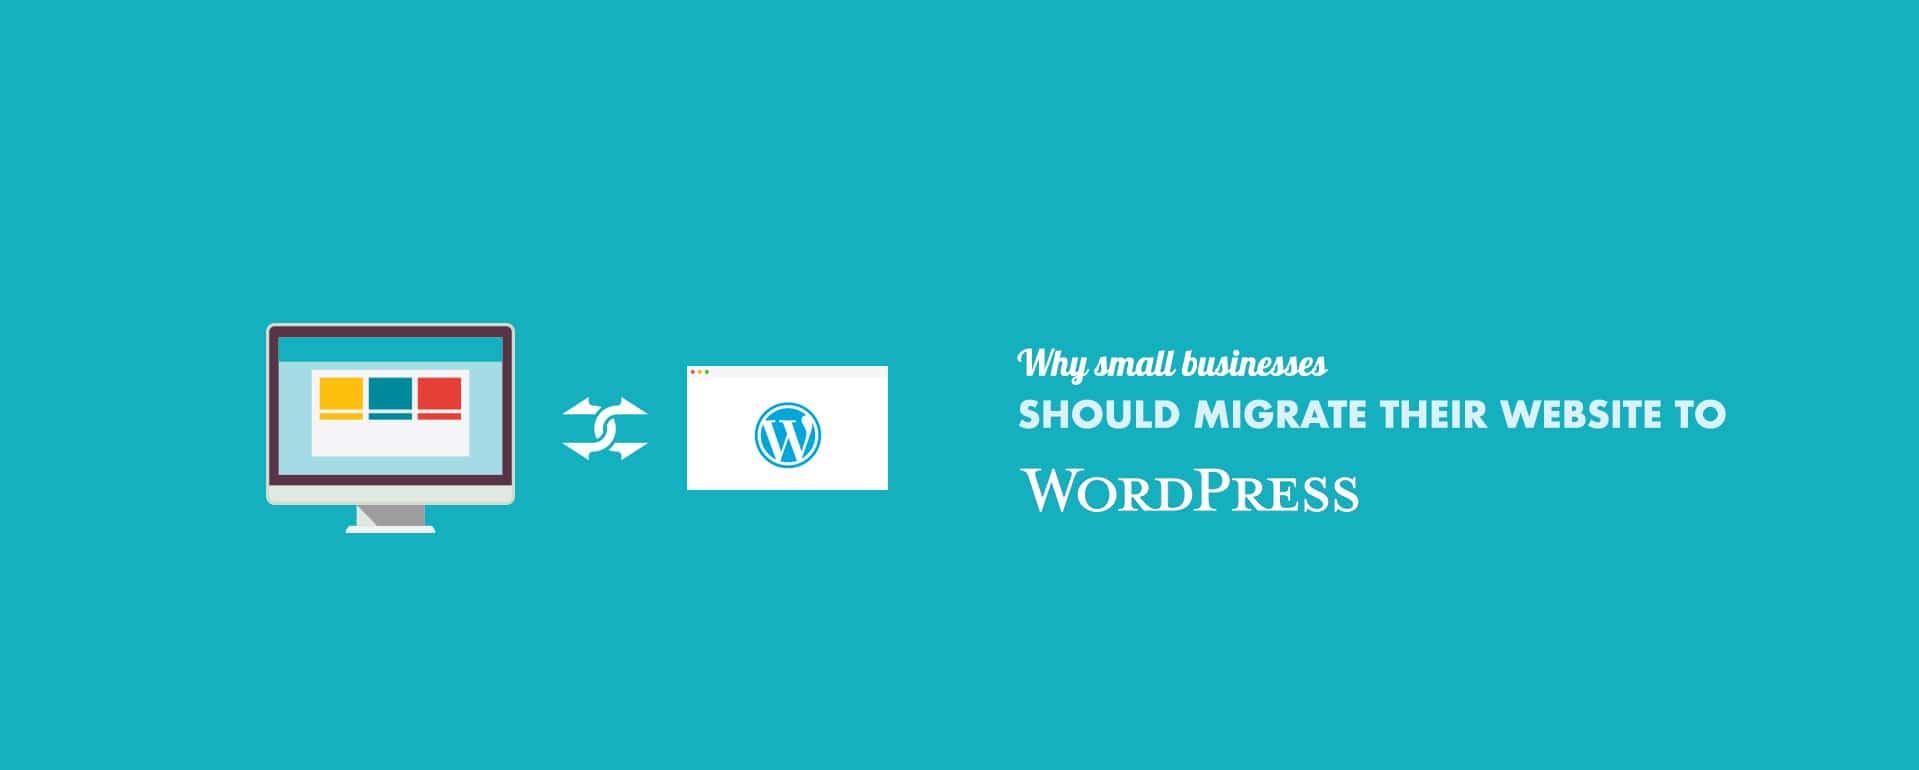 Why Small Businesses Should Migrate Website to WordPress